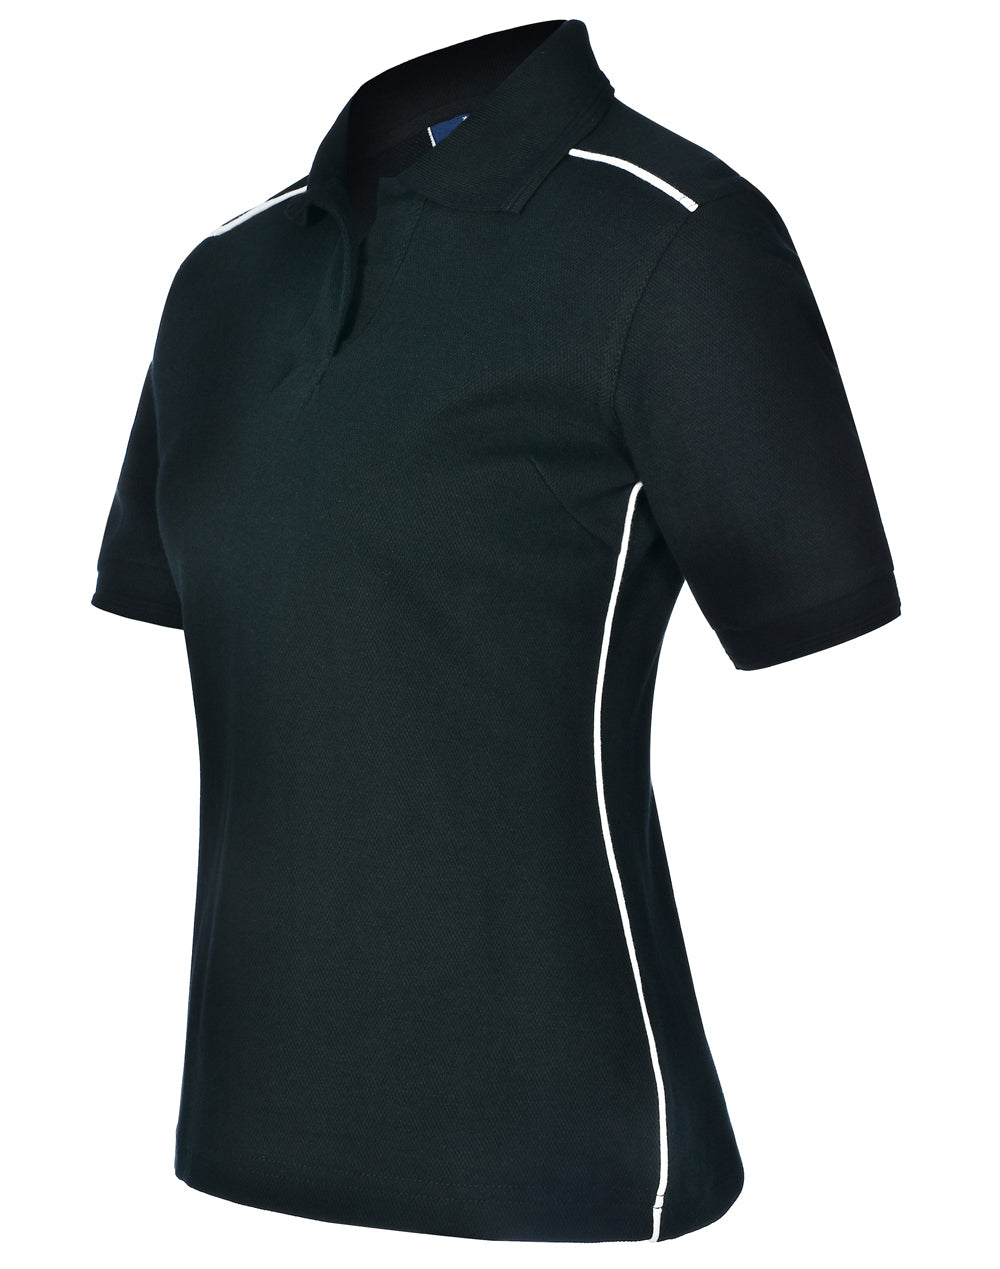 Winning Spirit-Ladies' Pure Cotton Contrast Piping Short Sleeve Polo-PS26